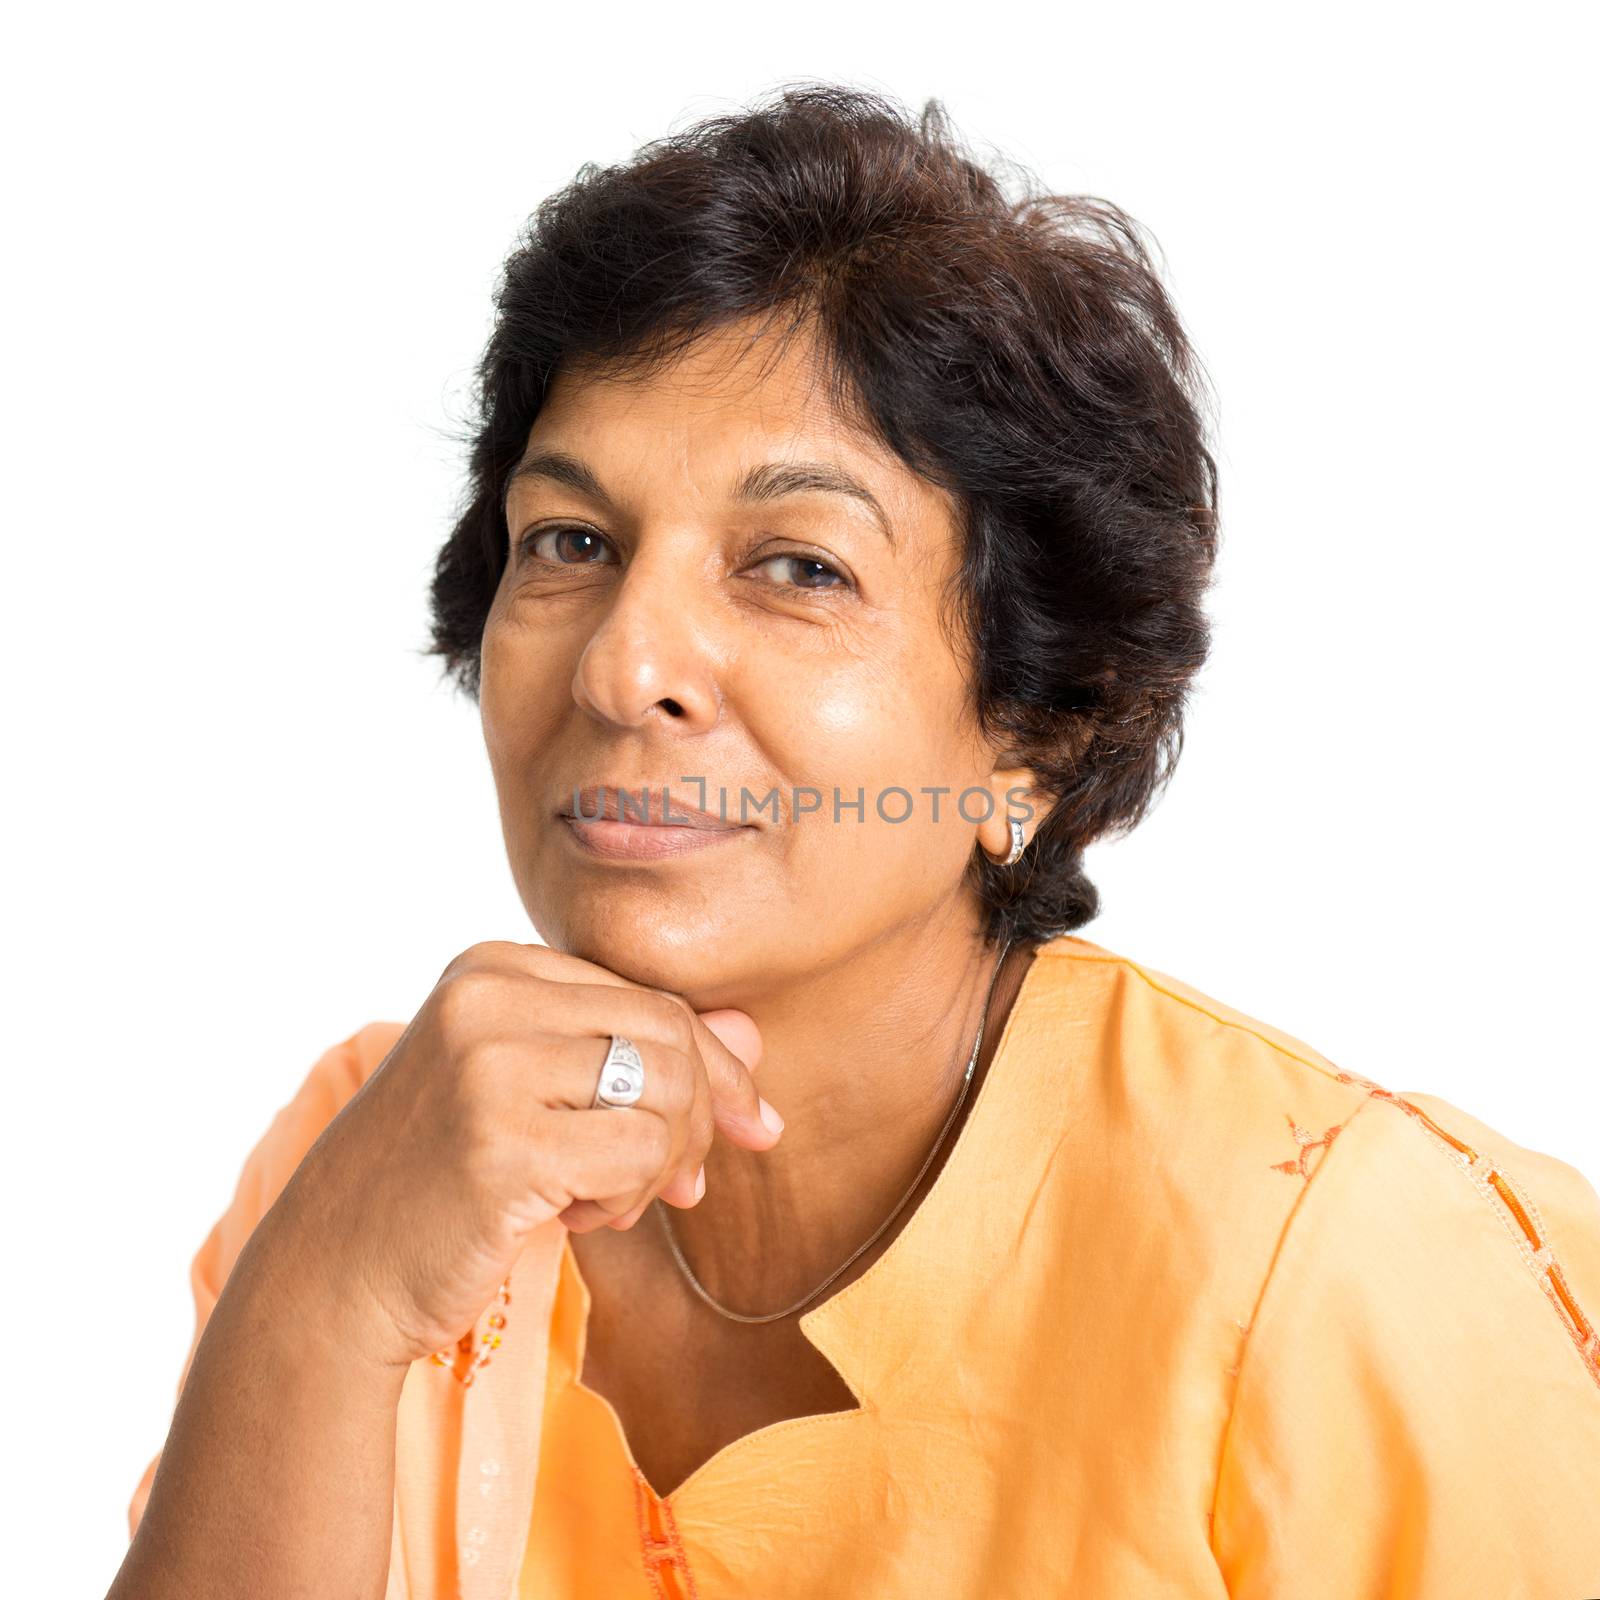 Portrait of a happy 50s Indian mature woman smiling and looking at camera, isolated on white background.